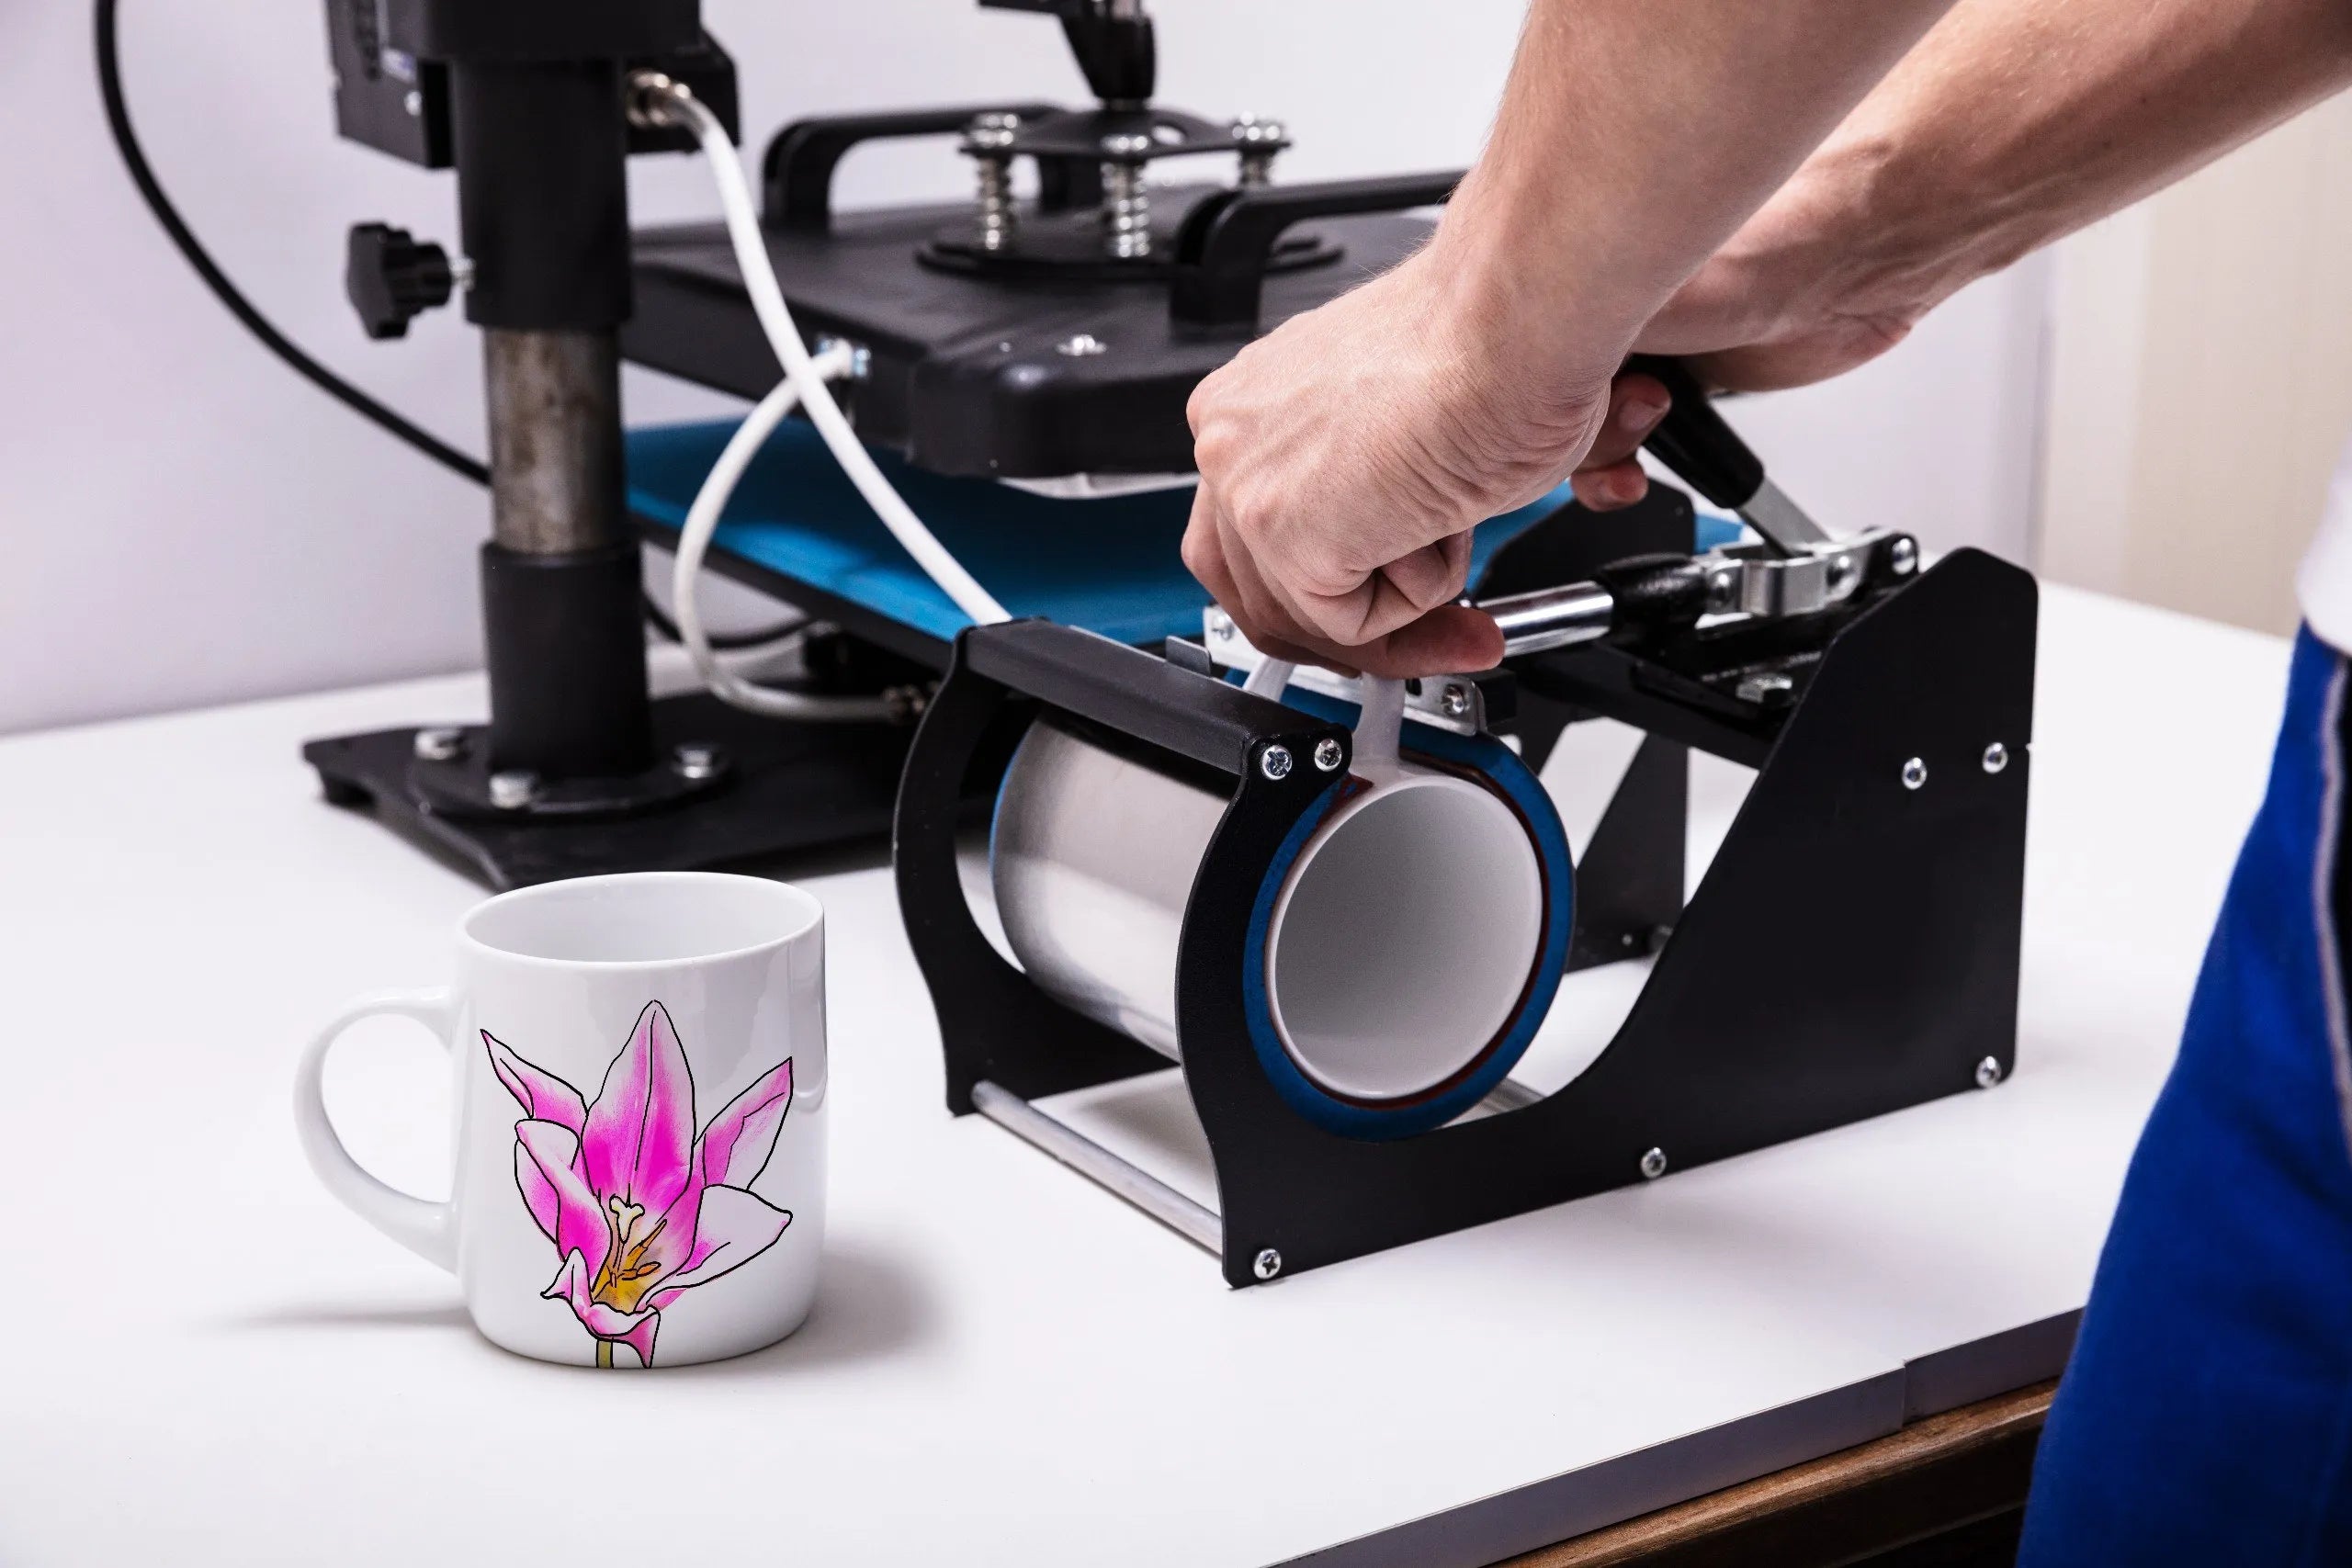 A mug printing process is quick and easy for your POD business. Source: Shutterstock.